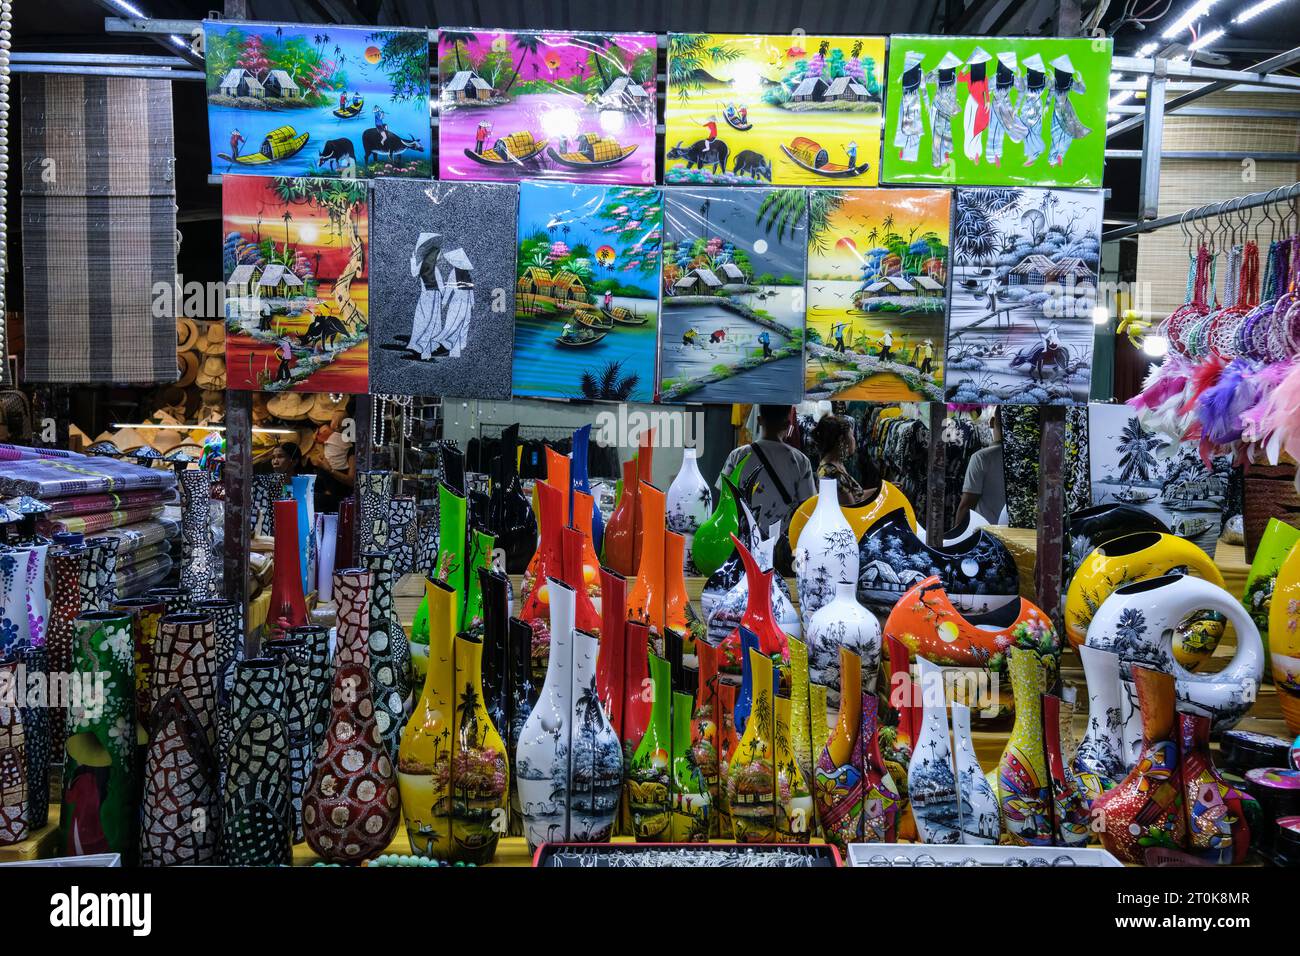 Hoi An, Vietnam. Night Market Vendor of Vases and Paintings. Stock Photo